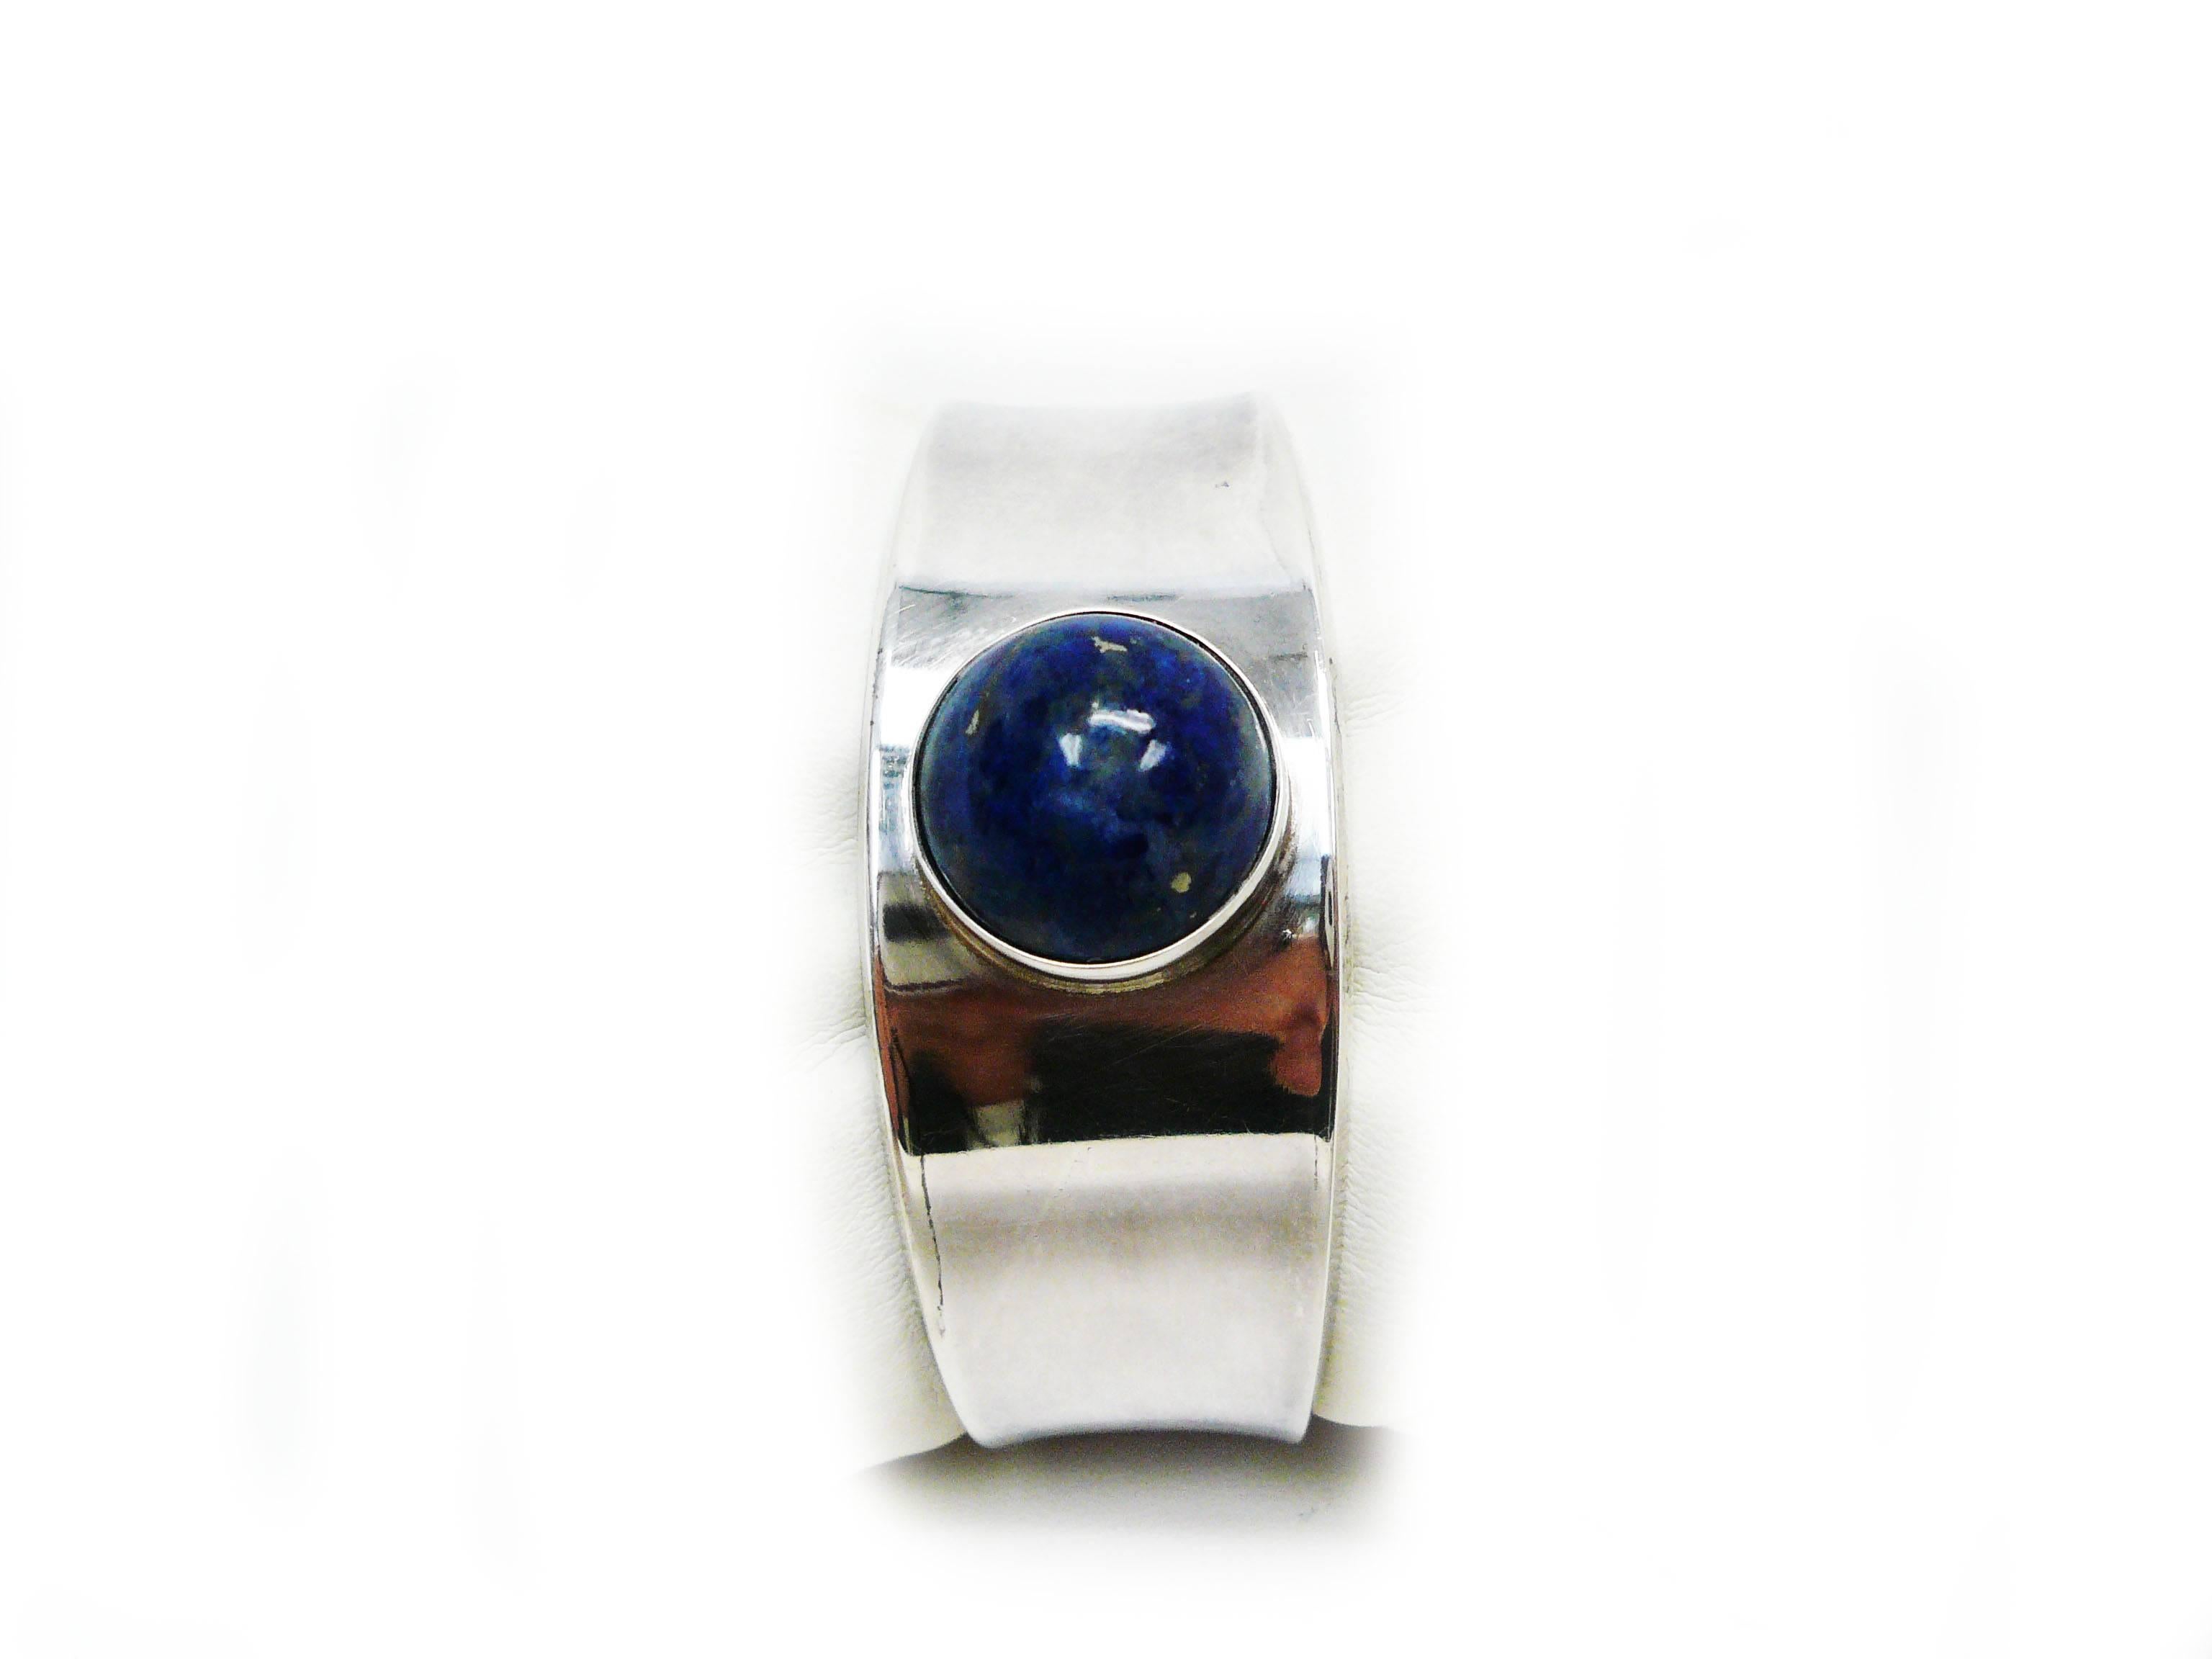 Post WWII design by Paul Hansen for Georg Jensen.
Classic sterling silver slightly tapered cuff bracelet with 16 mm round lapis
lazuli gemstone bezel-set.
Many fine artists worked for the Georg Jensen company through the company history.
This beauty